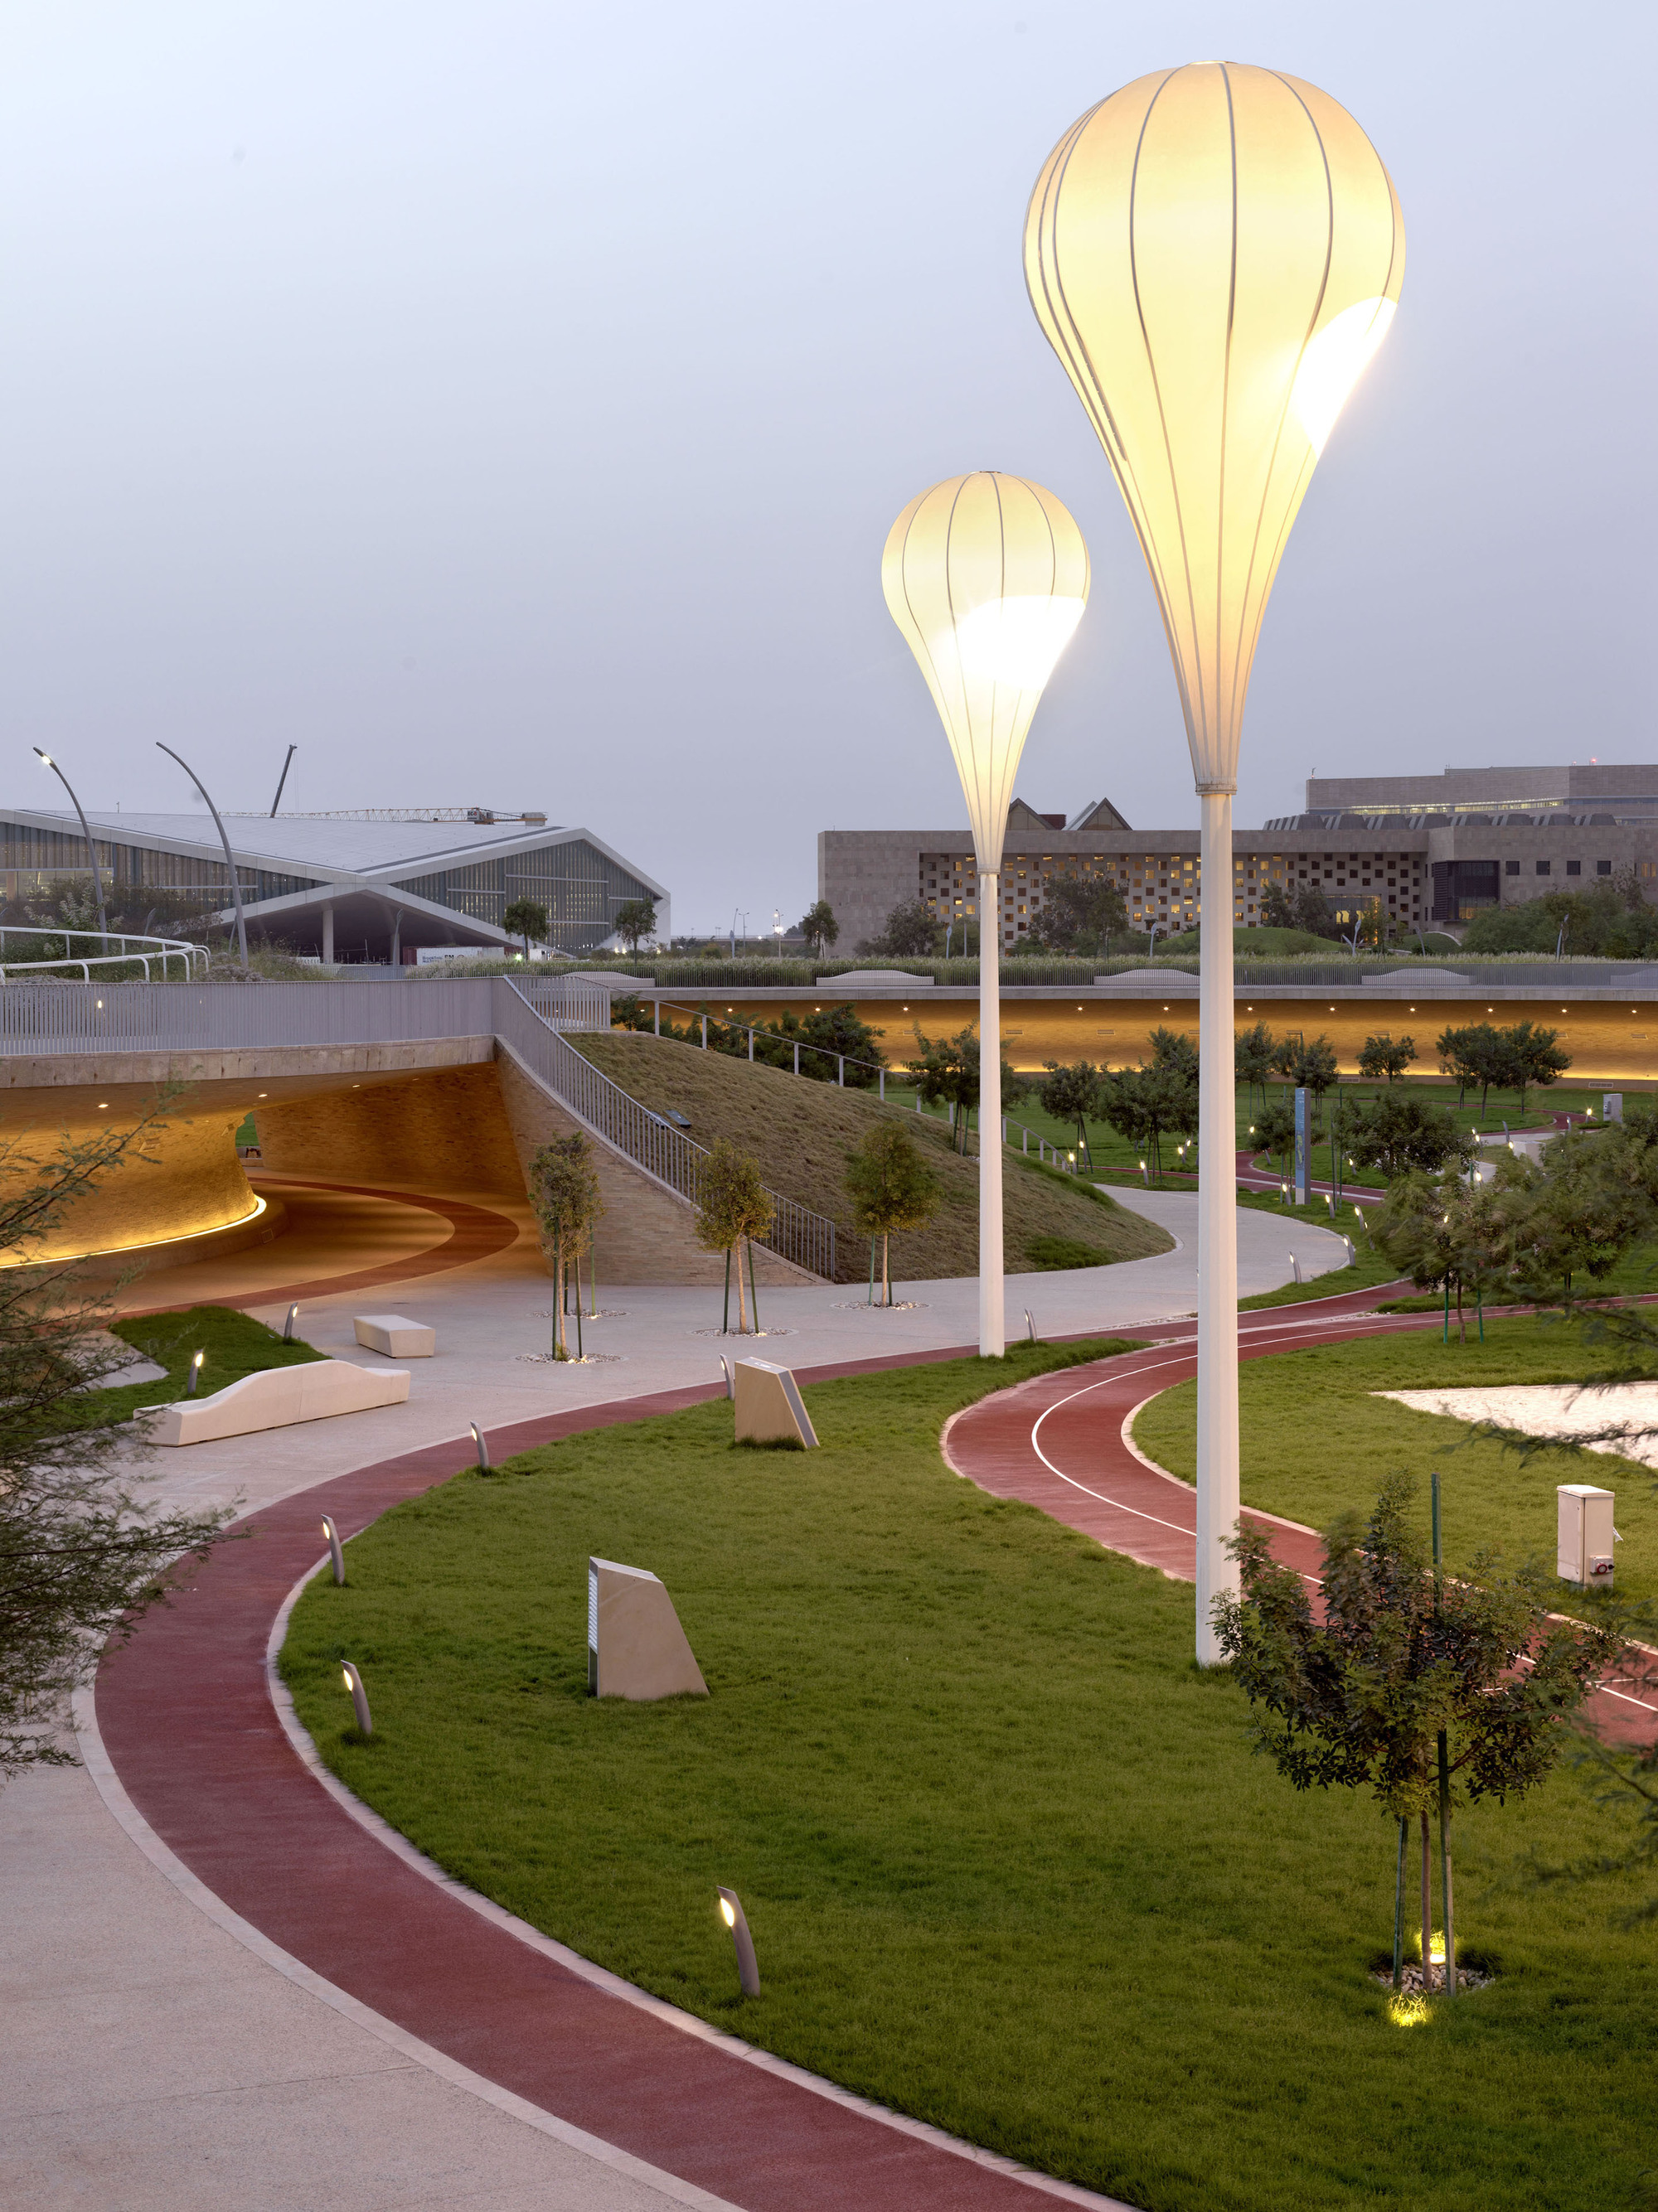 This is an adaptation of the traditional wind towers that can be found in the Arabian Gulf